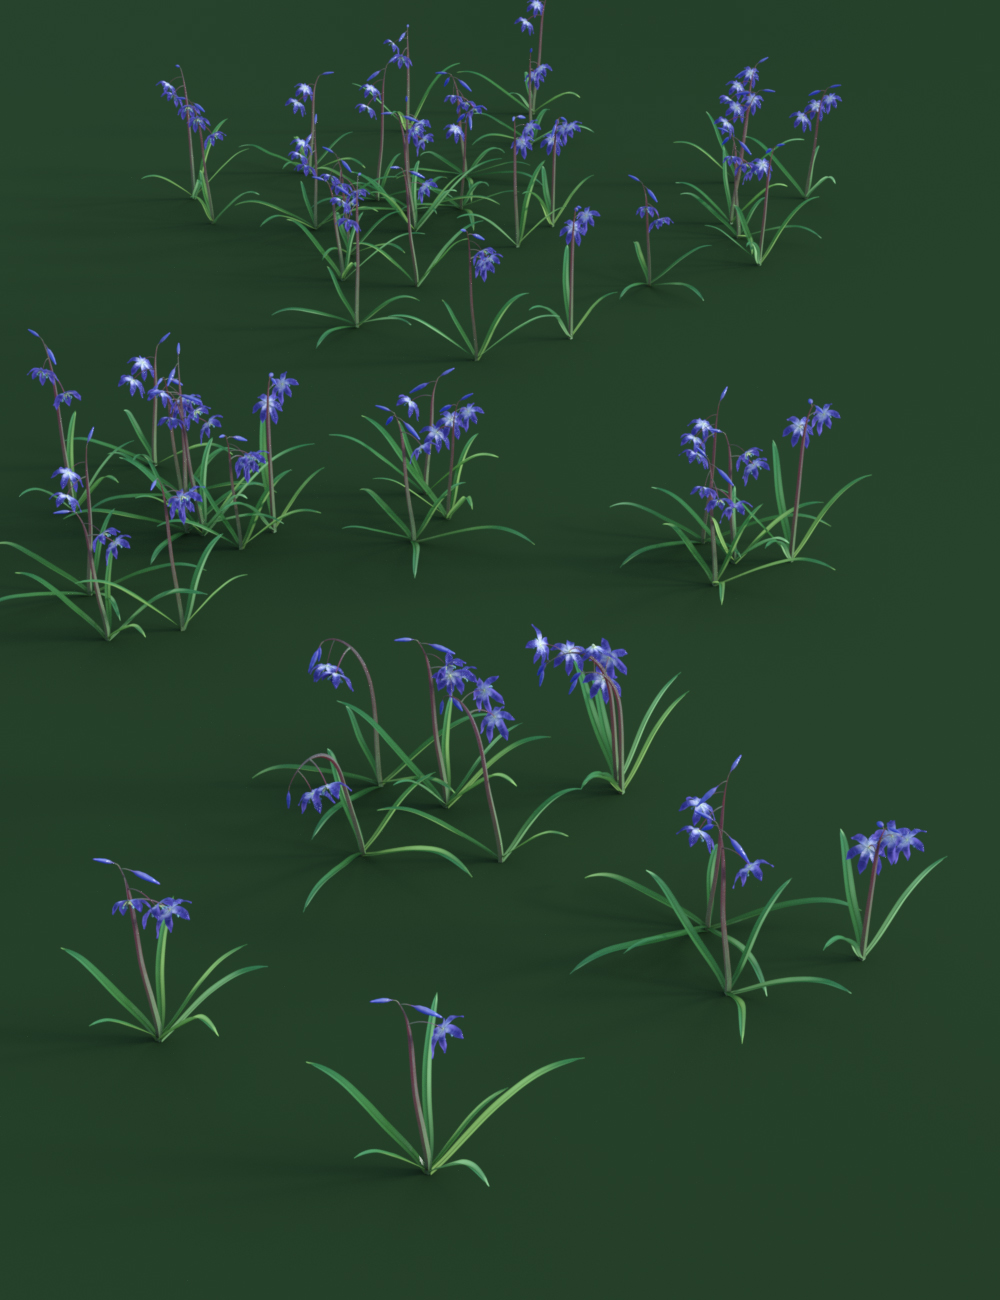 Spring Flowers - Scilla Siberica - Squills by: MartinJFrost, 3D Models by Daz 3D